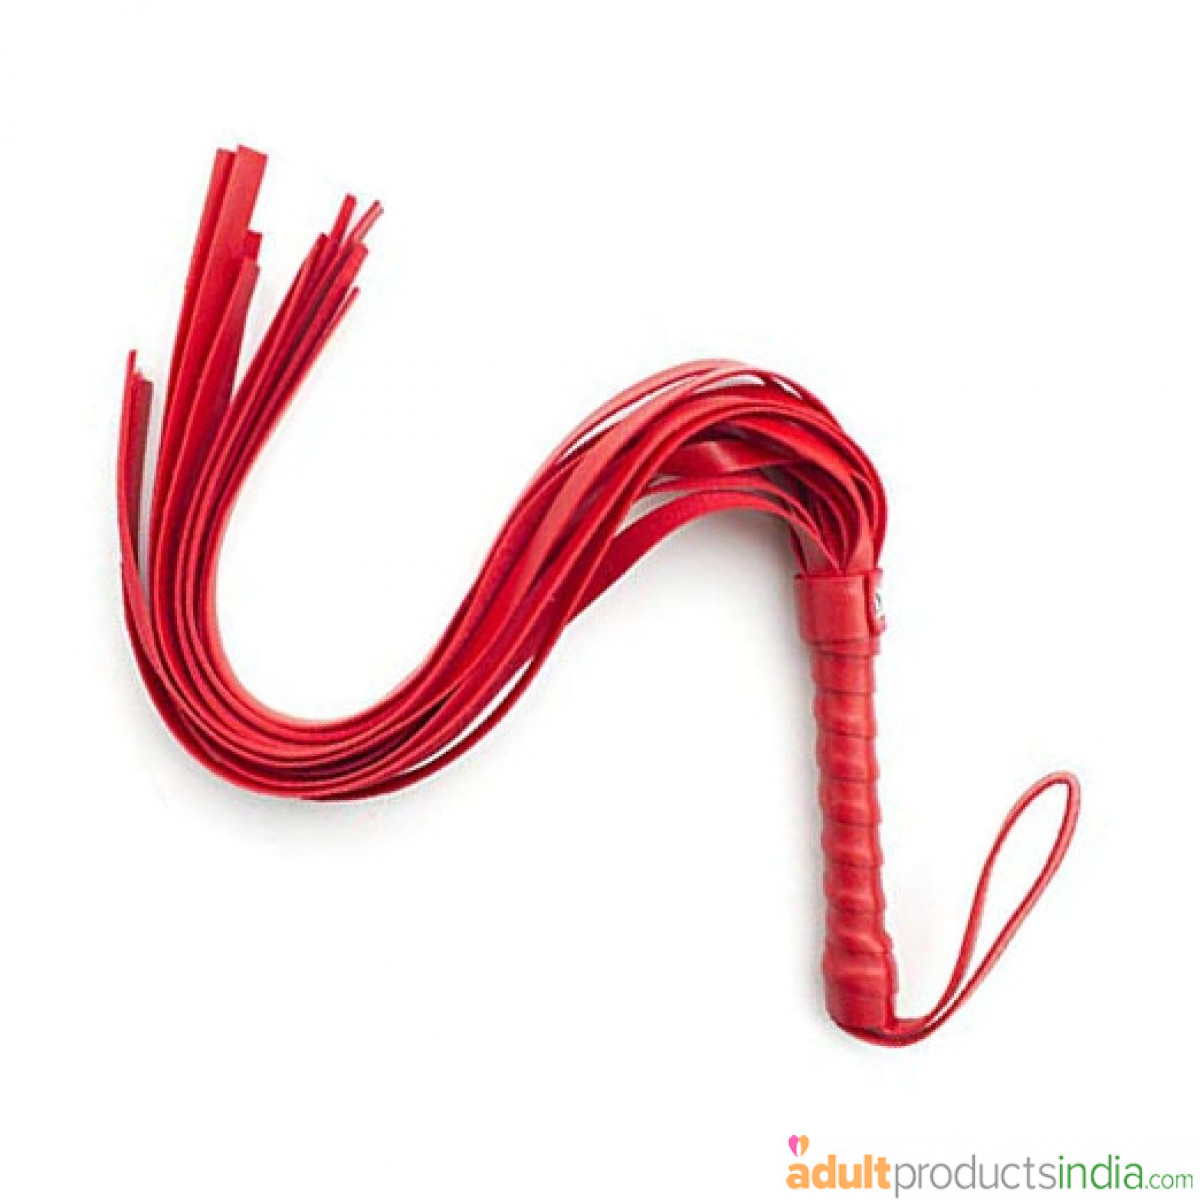 Leather Whip - Red & Black 